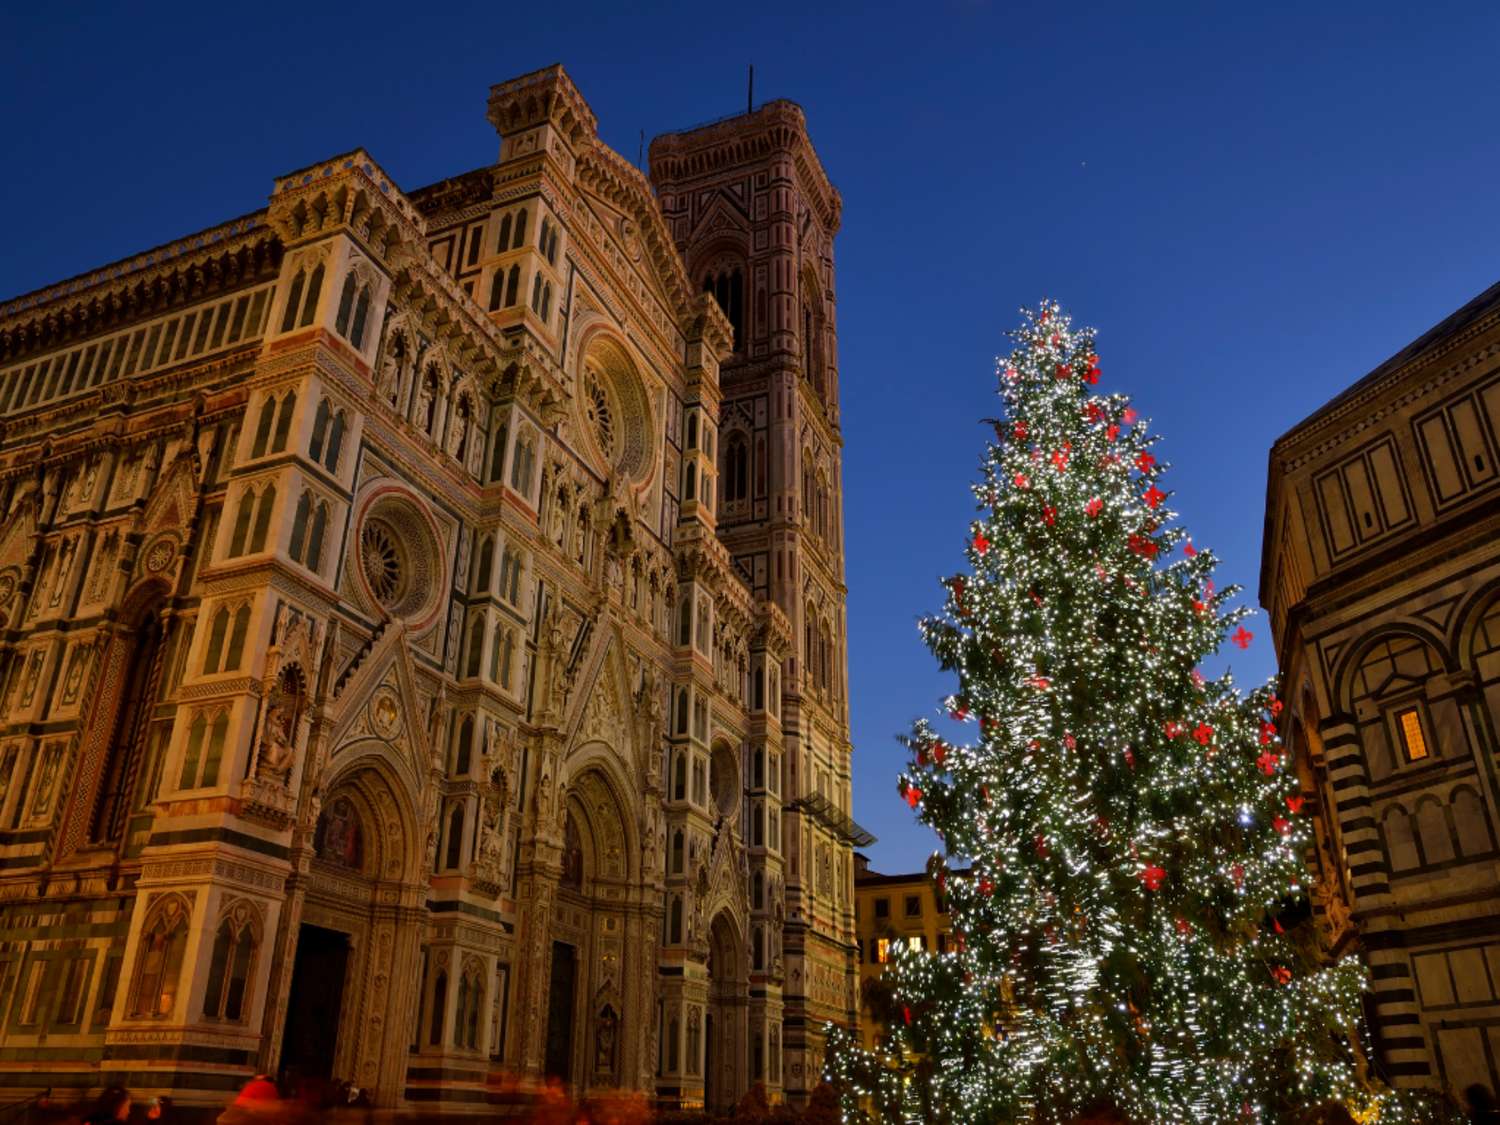 15 Christmas holiday destinations to feel truly festive